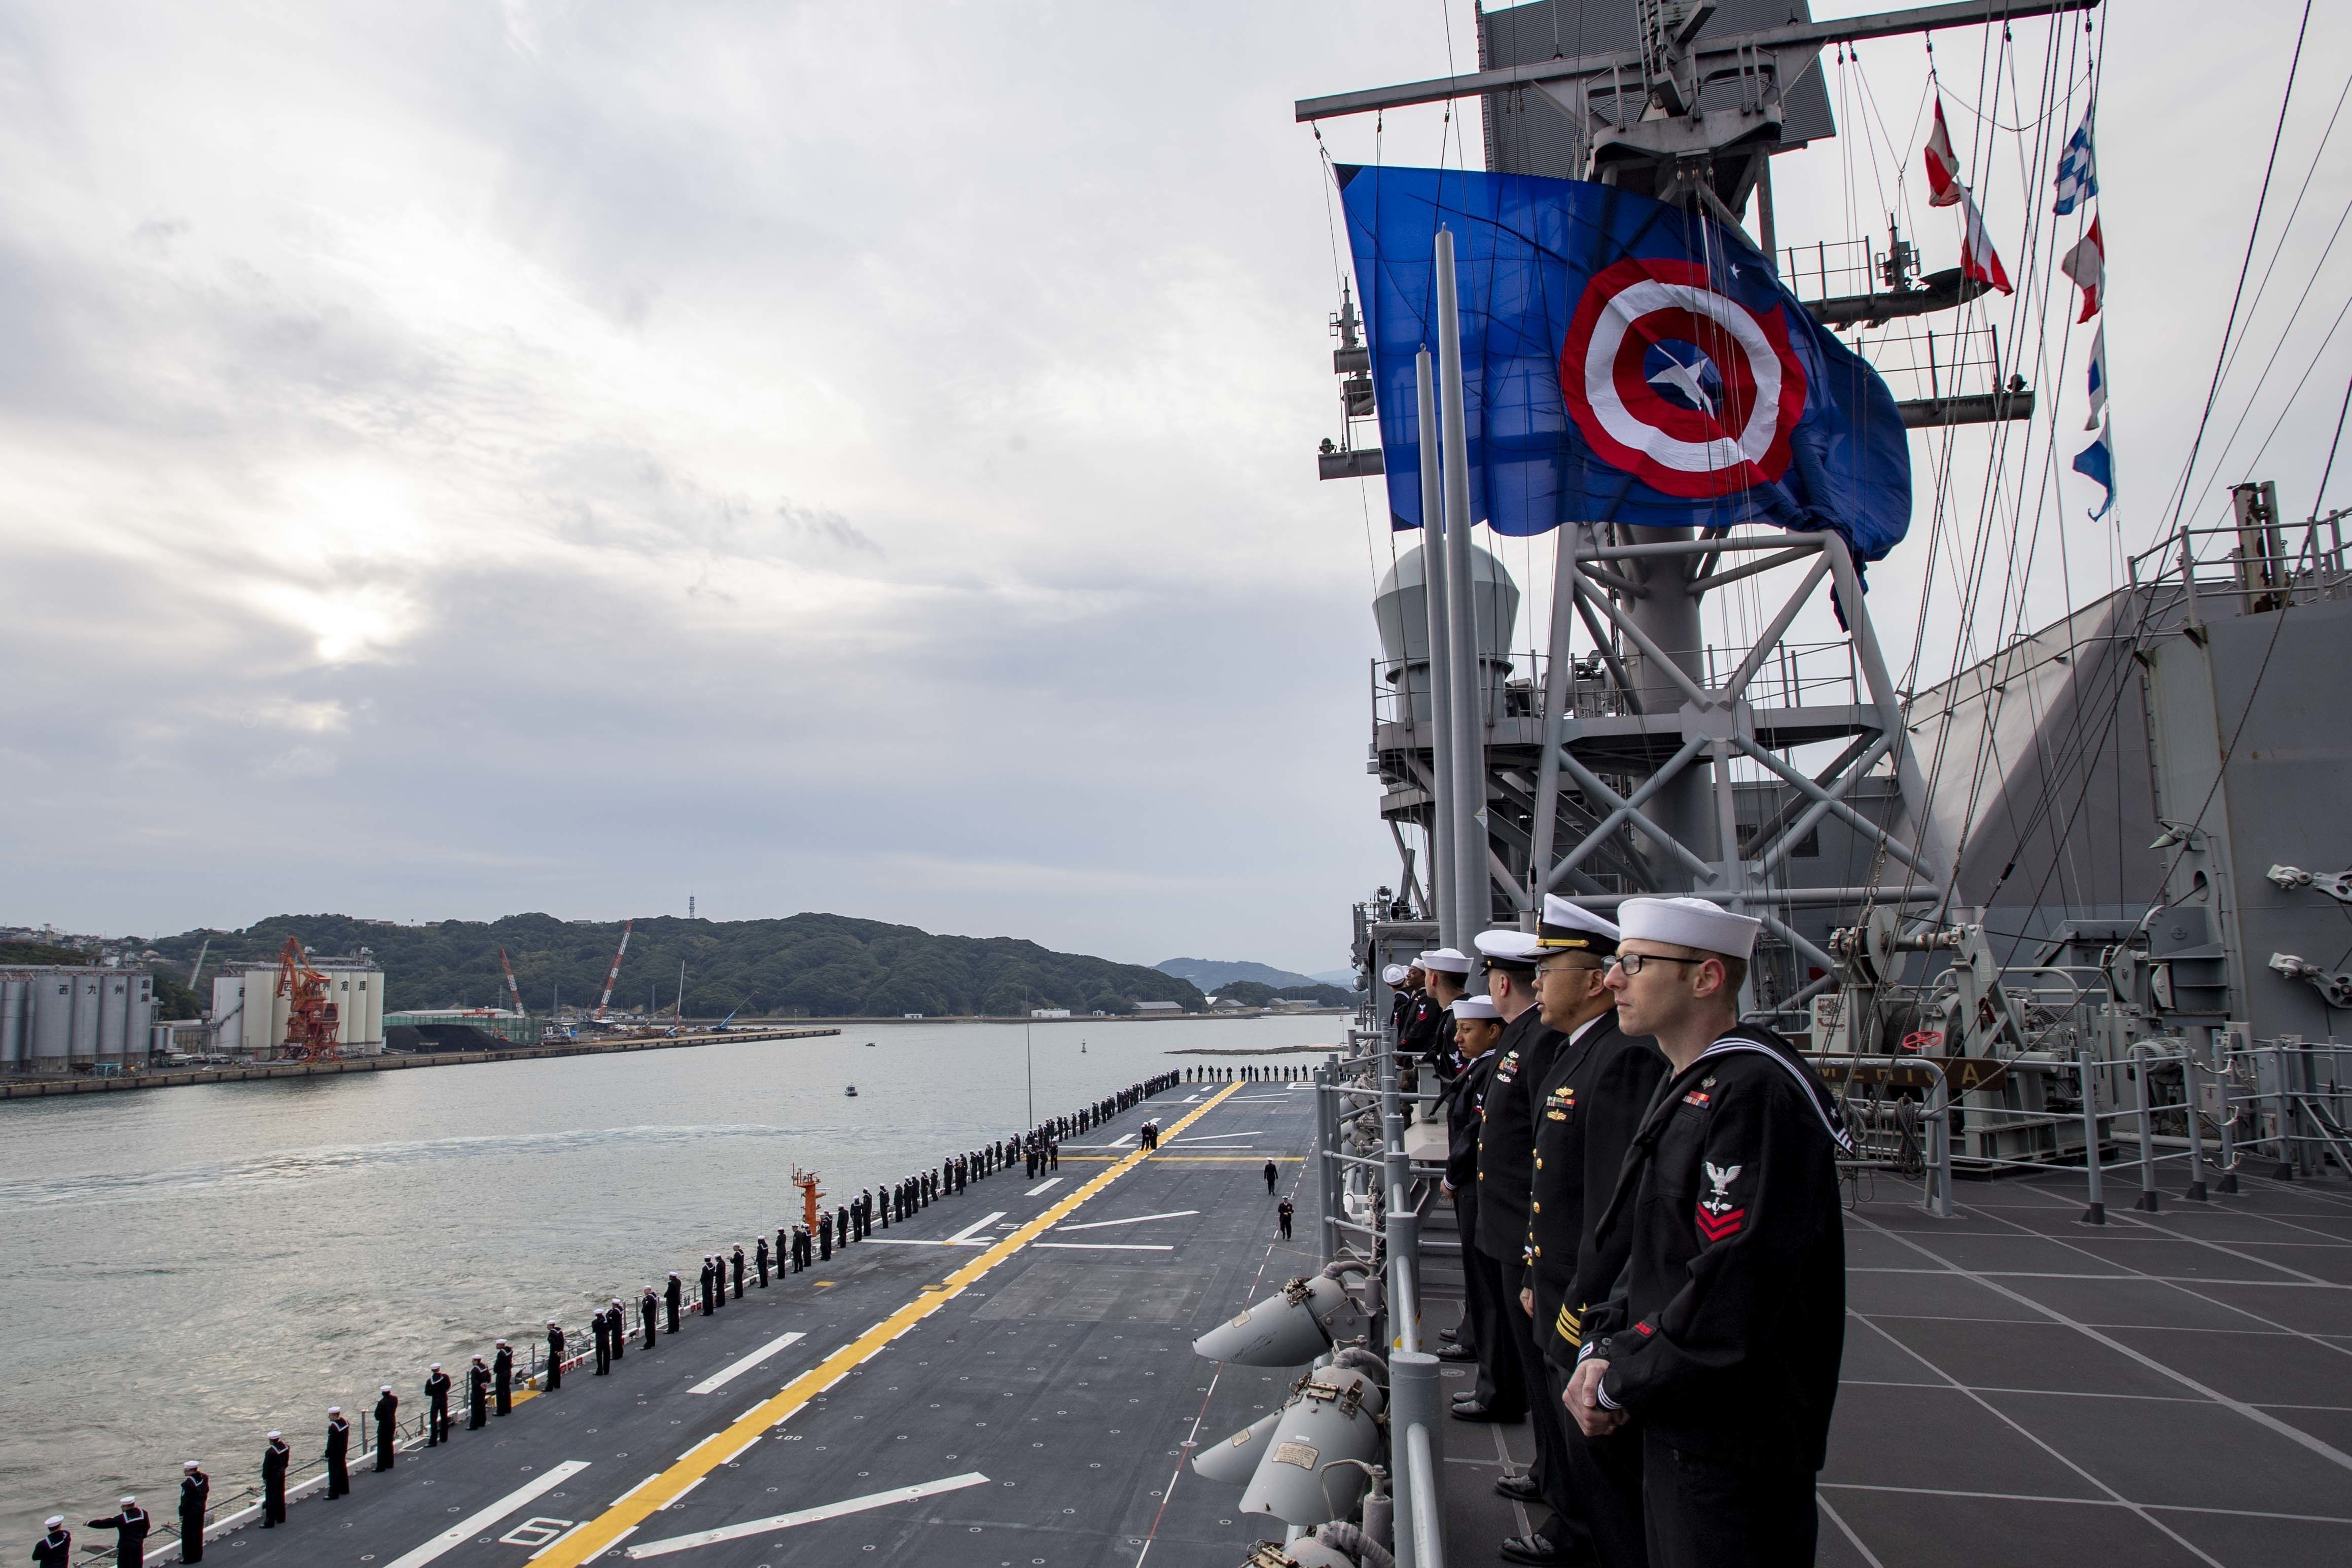  Sailors man the rails as the America-class amphibious assault ship USS America (LHA 6) arrives at Sasebo, Japan to join the forward deployed naval forces.